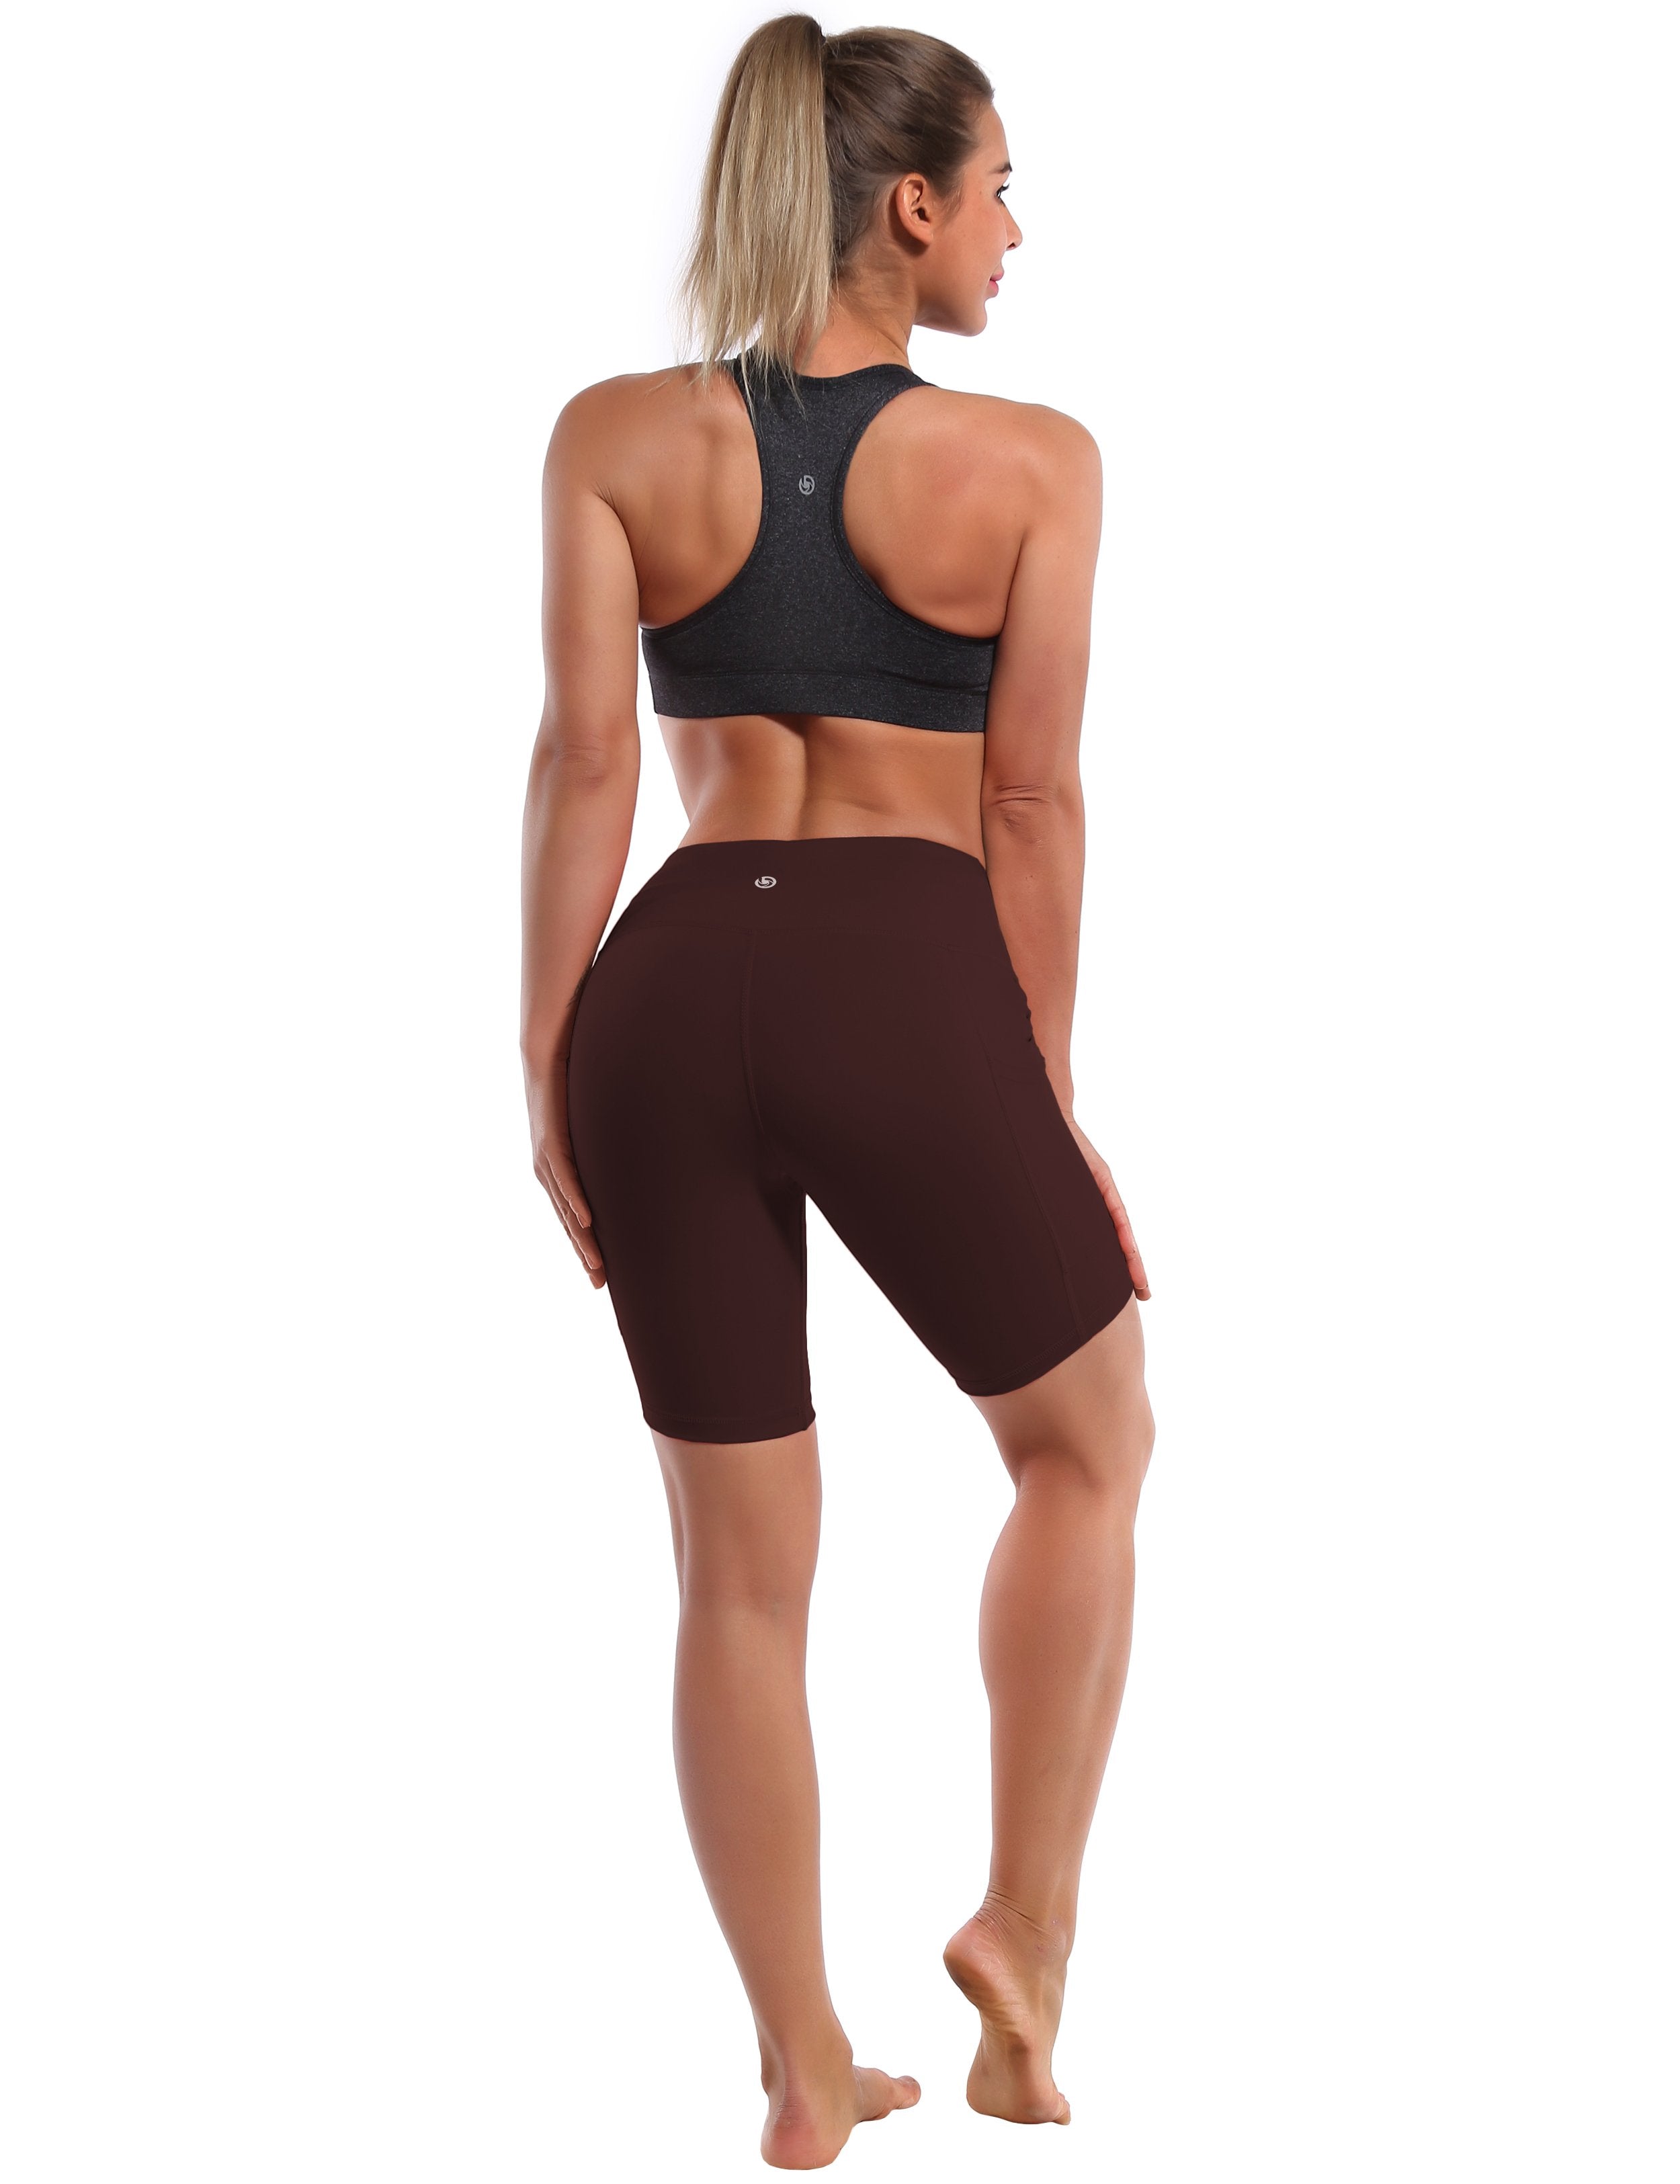 8" Side Pockets Yoga Shorts mahoganymaroon Sleek, soft, smooth and totally comfortable: our newest style is here. Softest-ever fabric High elasticity High density 4-way stretch Fabric doesn't attract lint easily No see-through Moisture-wicking Machine wash 75% Nylon, 25% Spandex